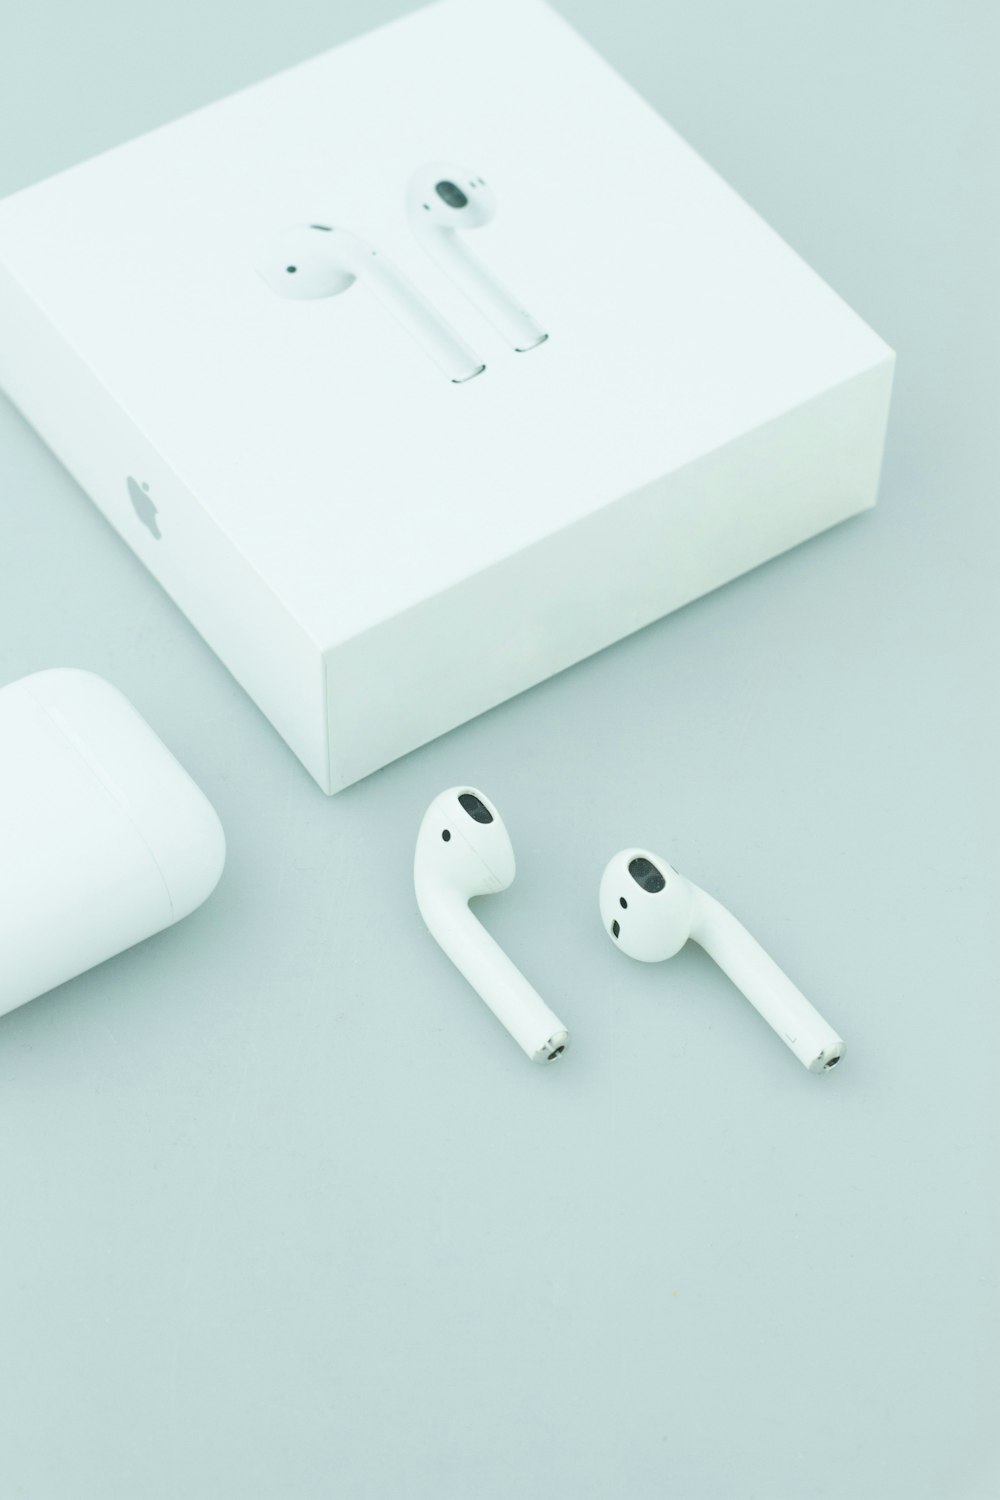 AirPods d’Apple